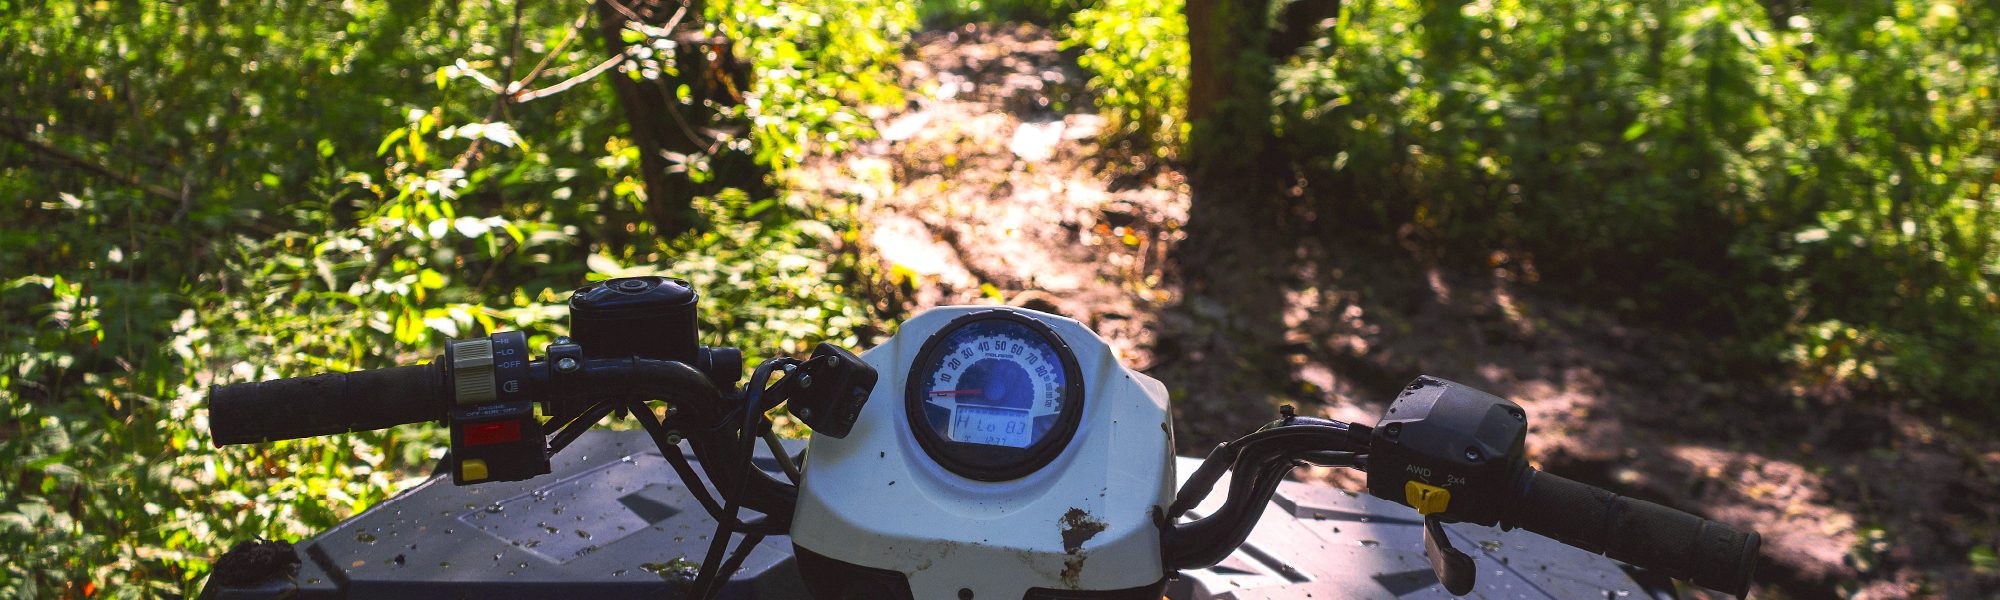 pov looking over the handlebars of an atv